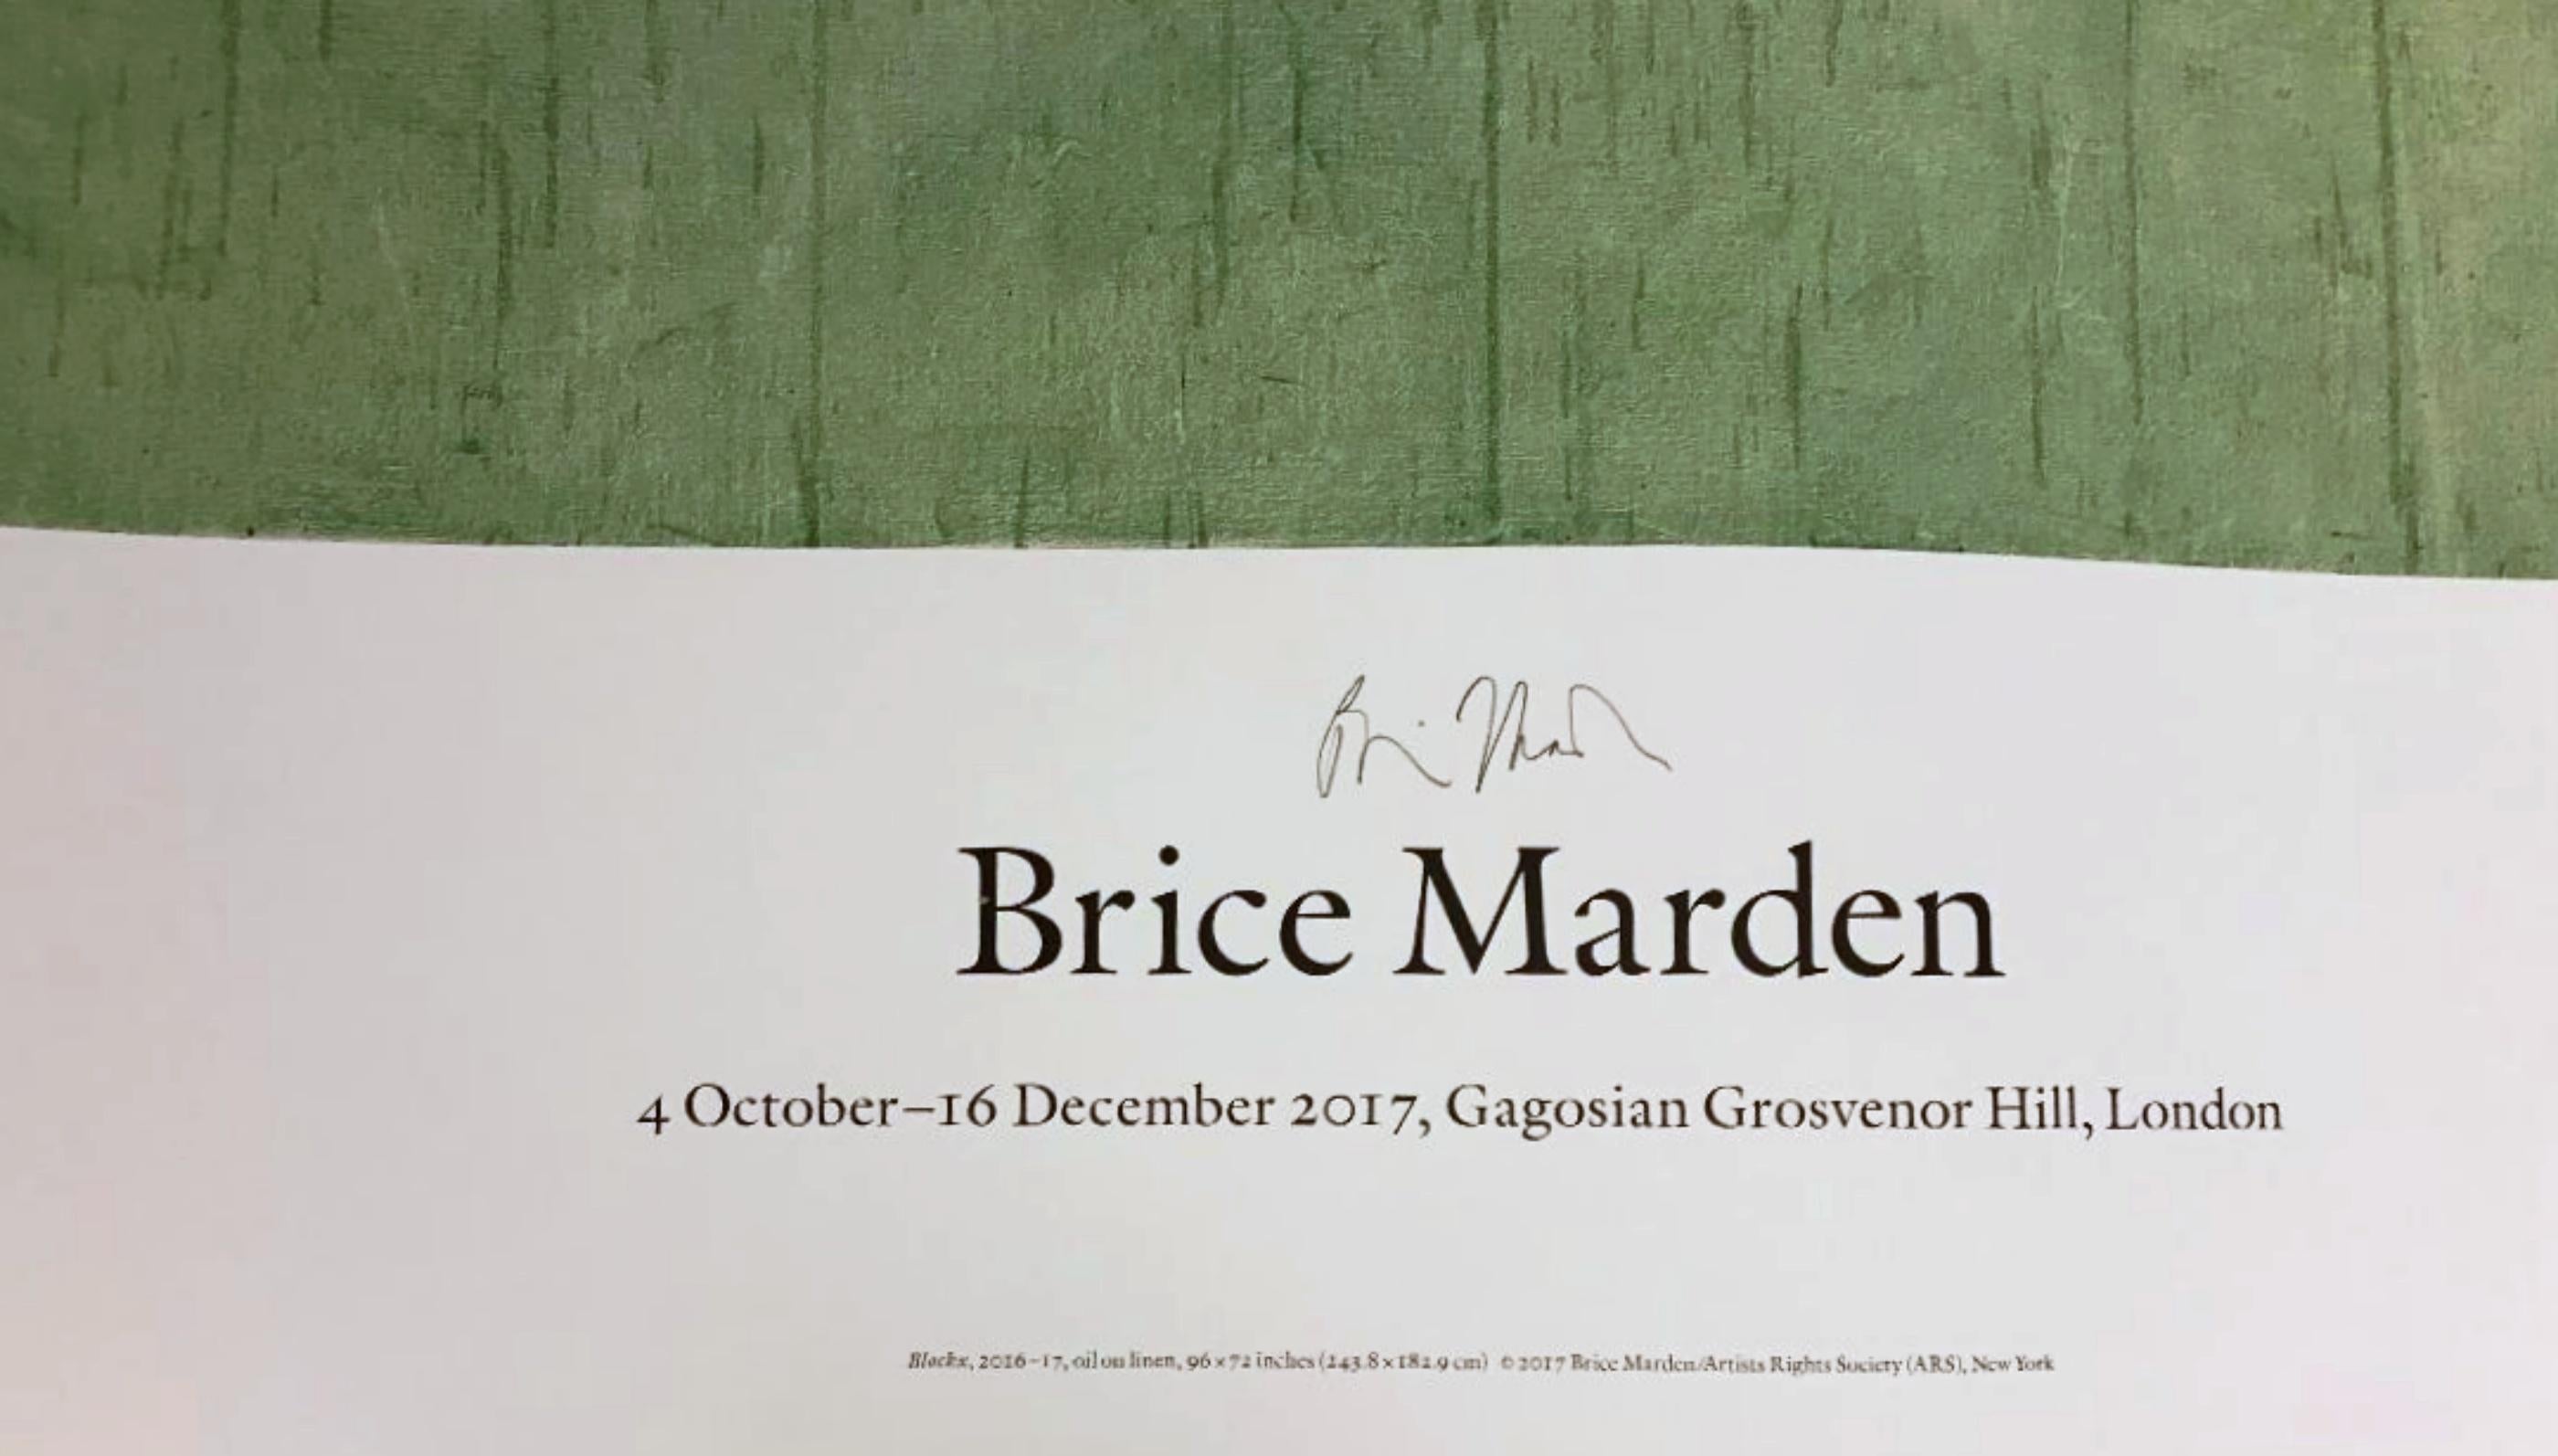 Brice Marden in London (Hand signed), 2017
Offset lithograph poster. Hand signed by Brice Marden
Signed in black marker by Brice Marden on the front
39 × 27 inches
Unframed
Provenance: Acquired directly from Gagosian Gallery by the present owner.